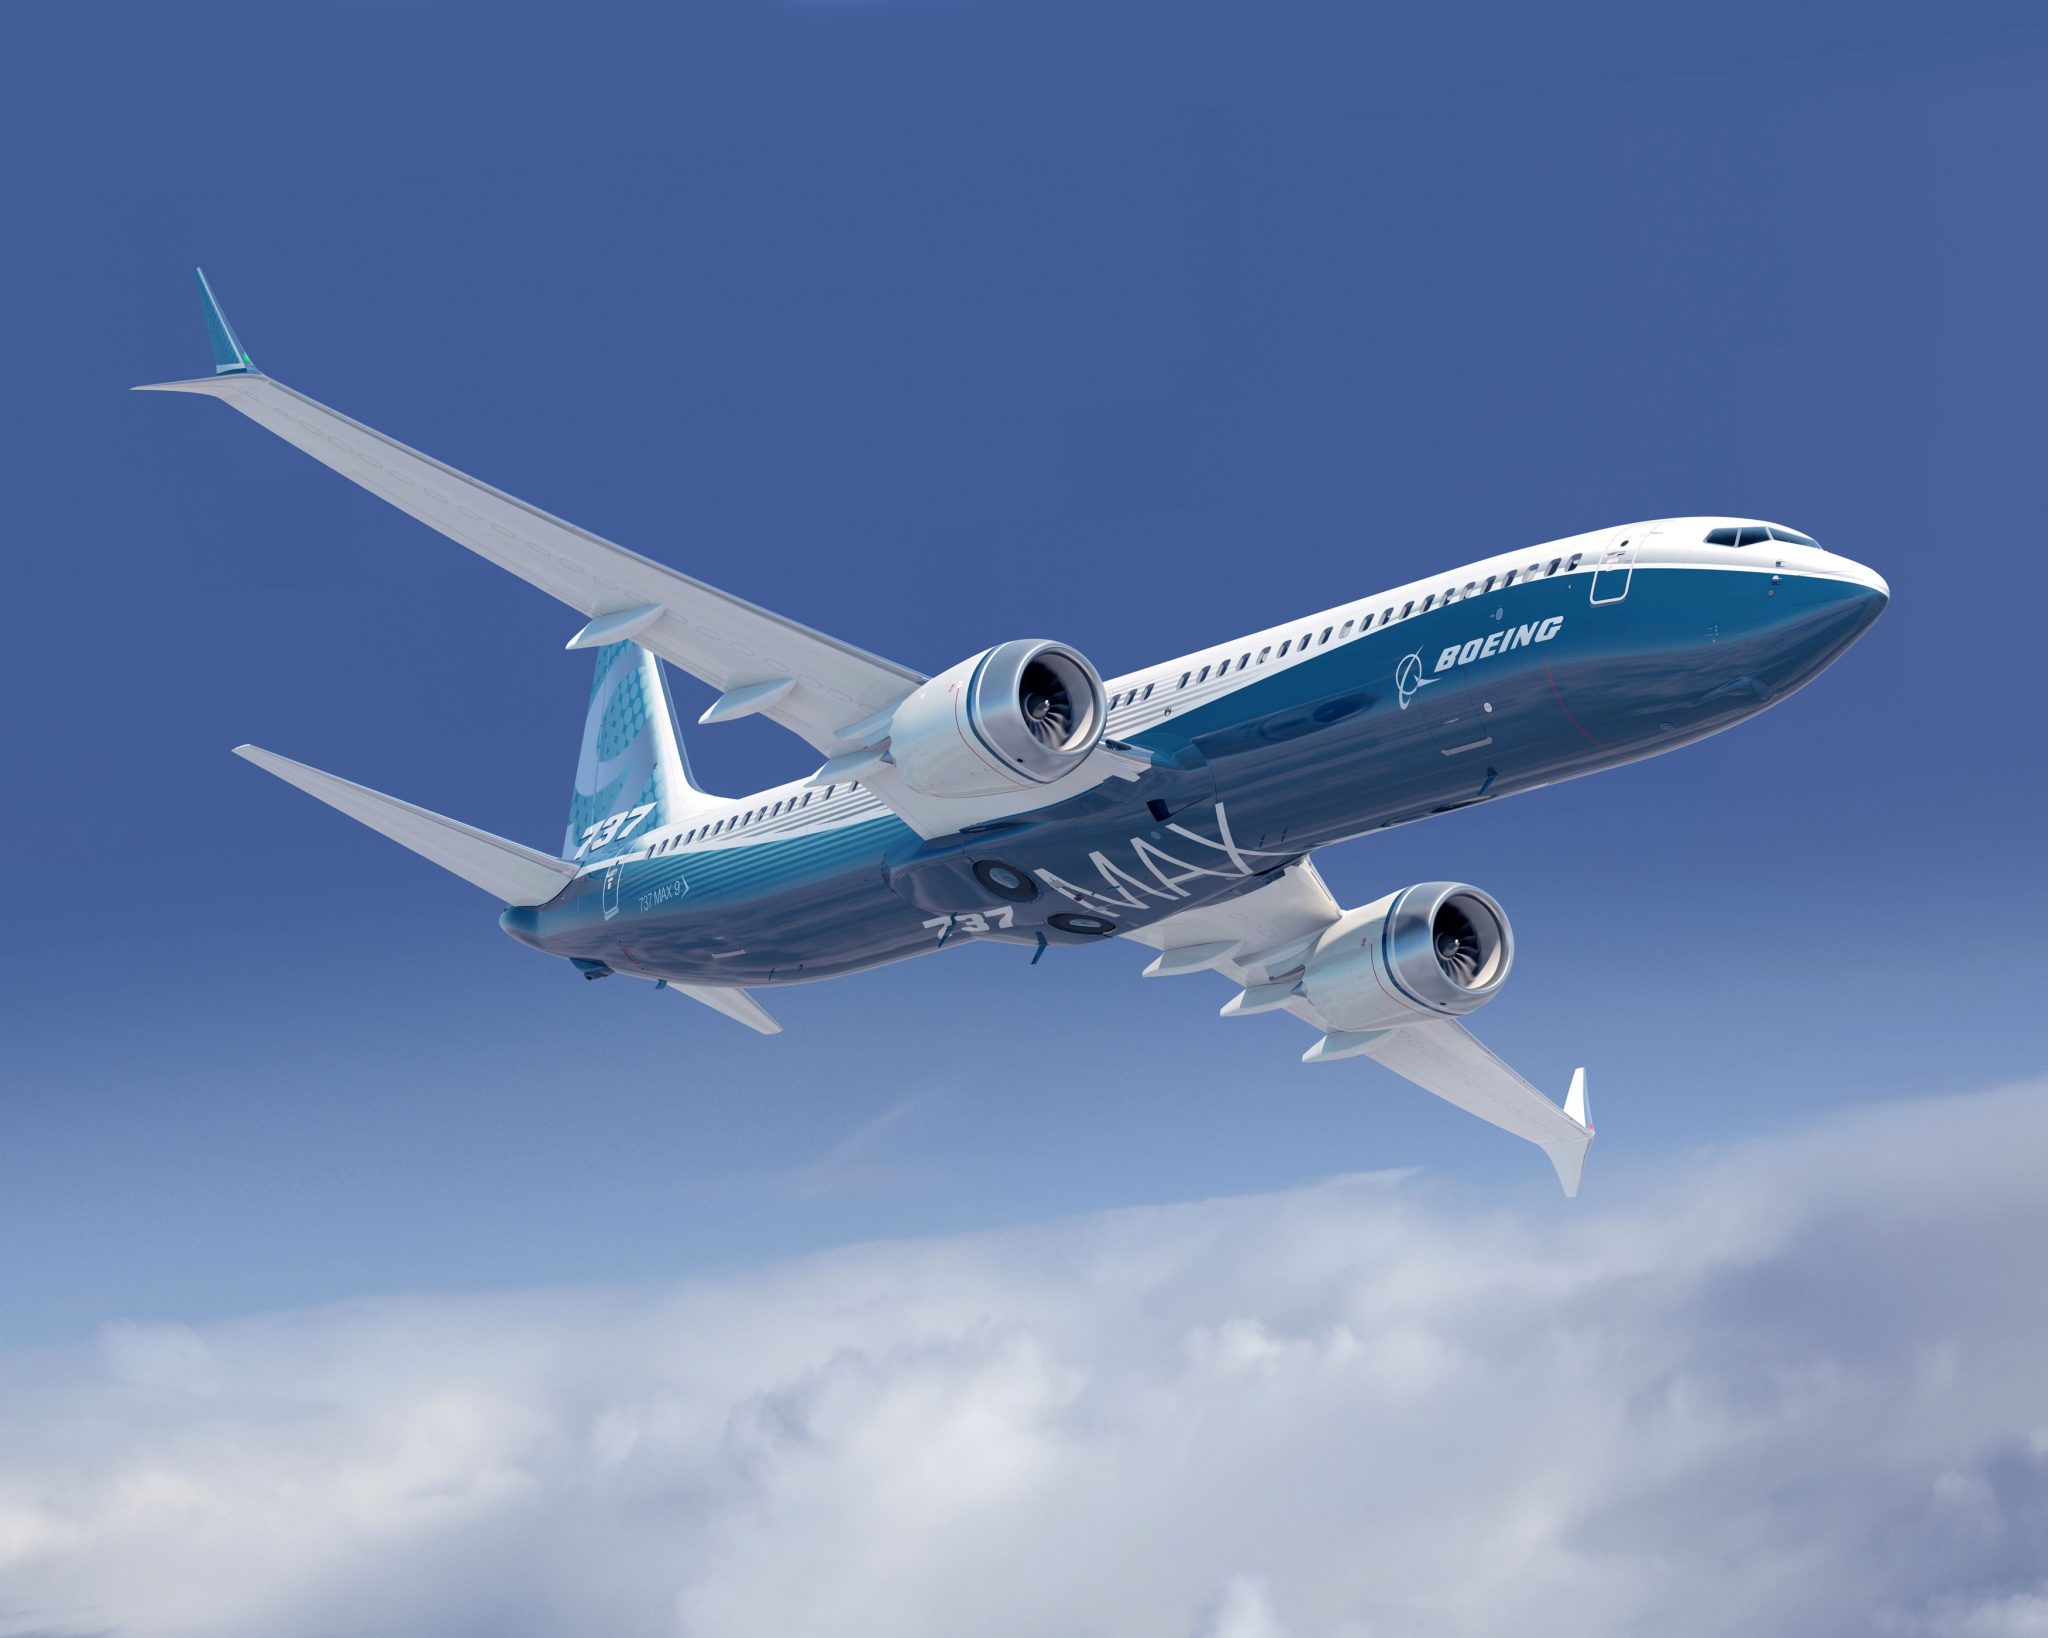 LOT sues Boeing over MAX Compensation